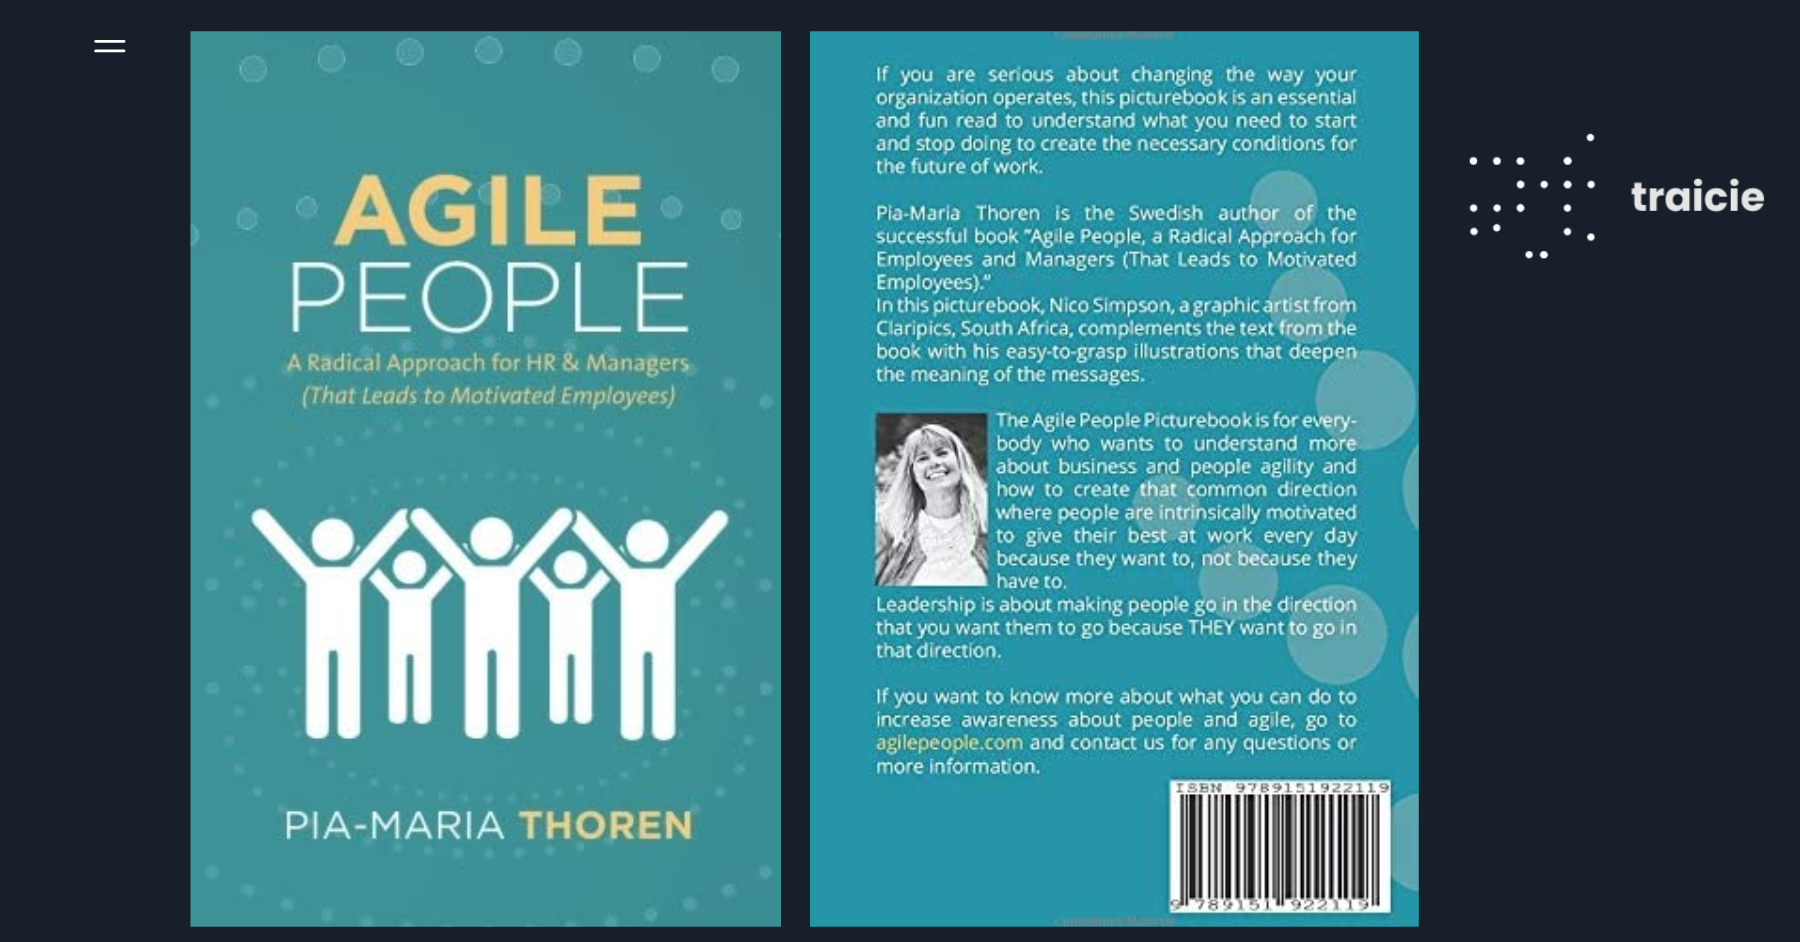 Agile People: A Radical Approach for HR & Managers Free Ebook PDF download